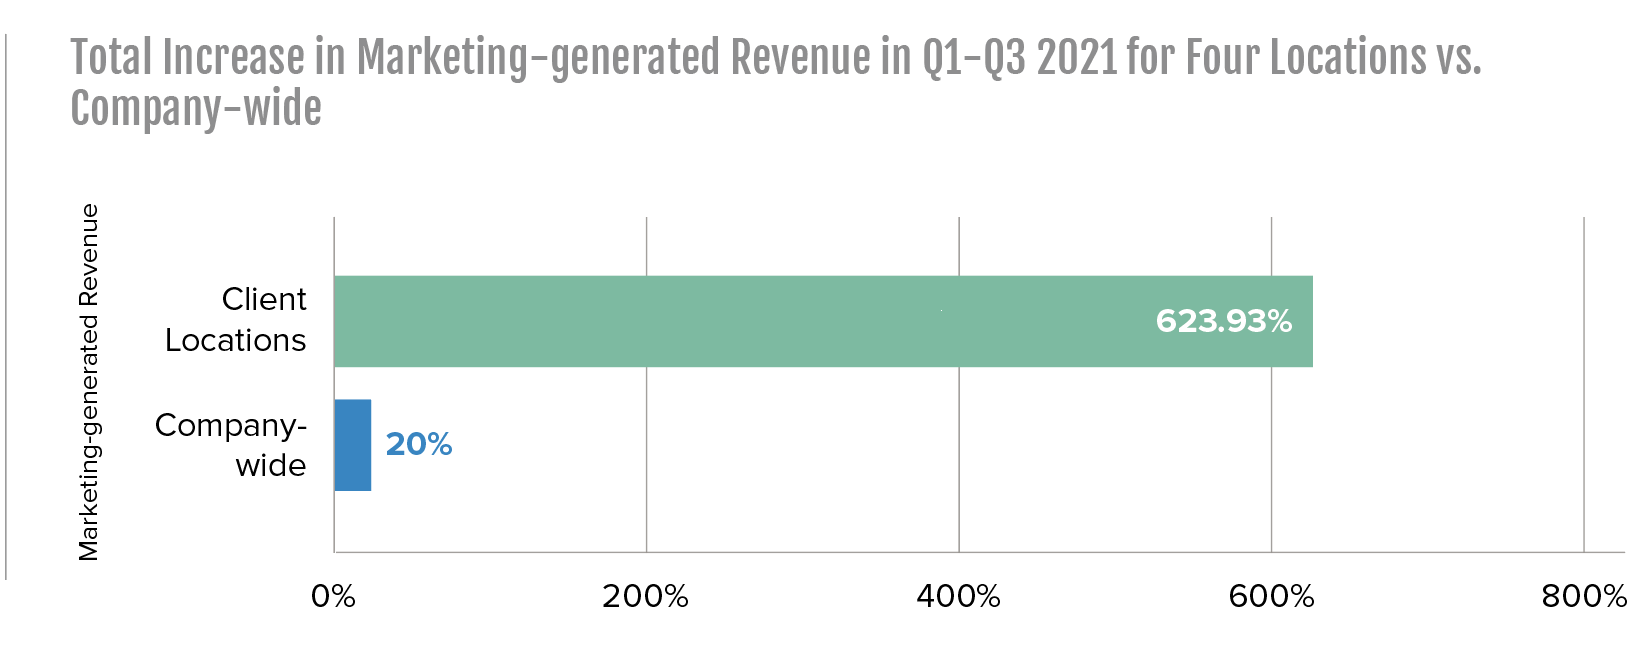 total increase in marketing generated revenue in Q1 through Q3 2021 for 4 locations vs company wide